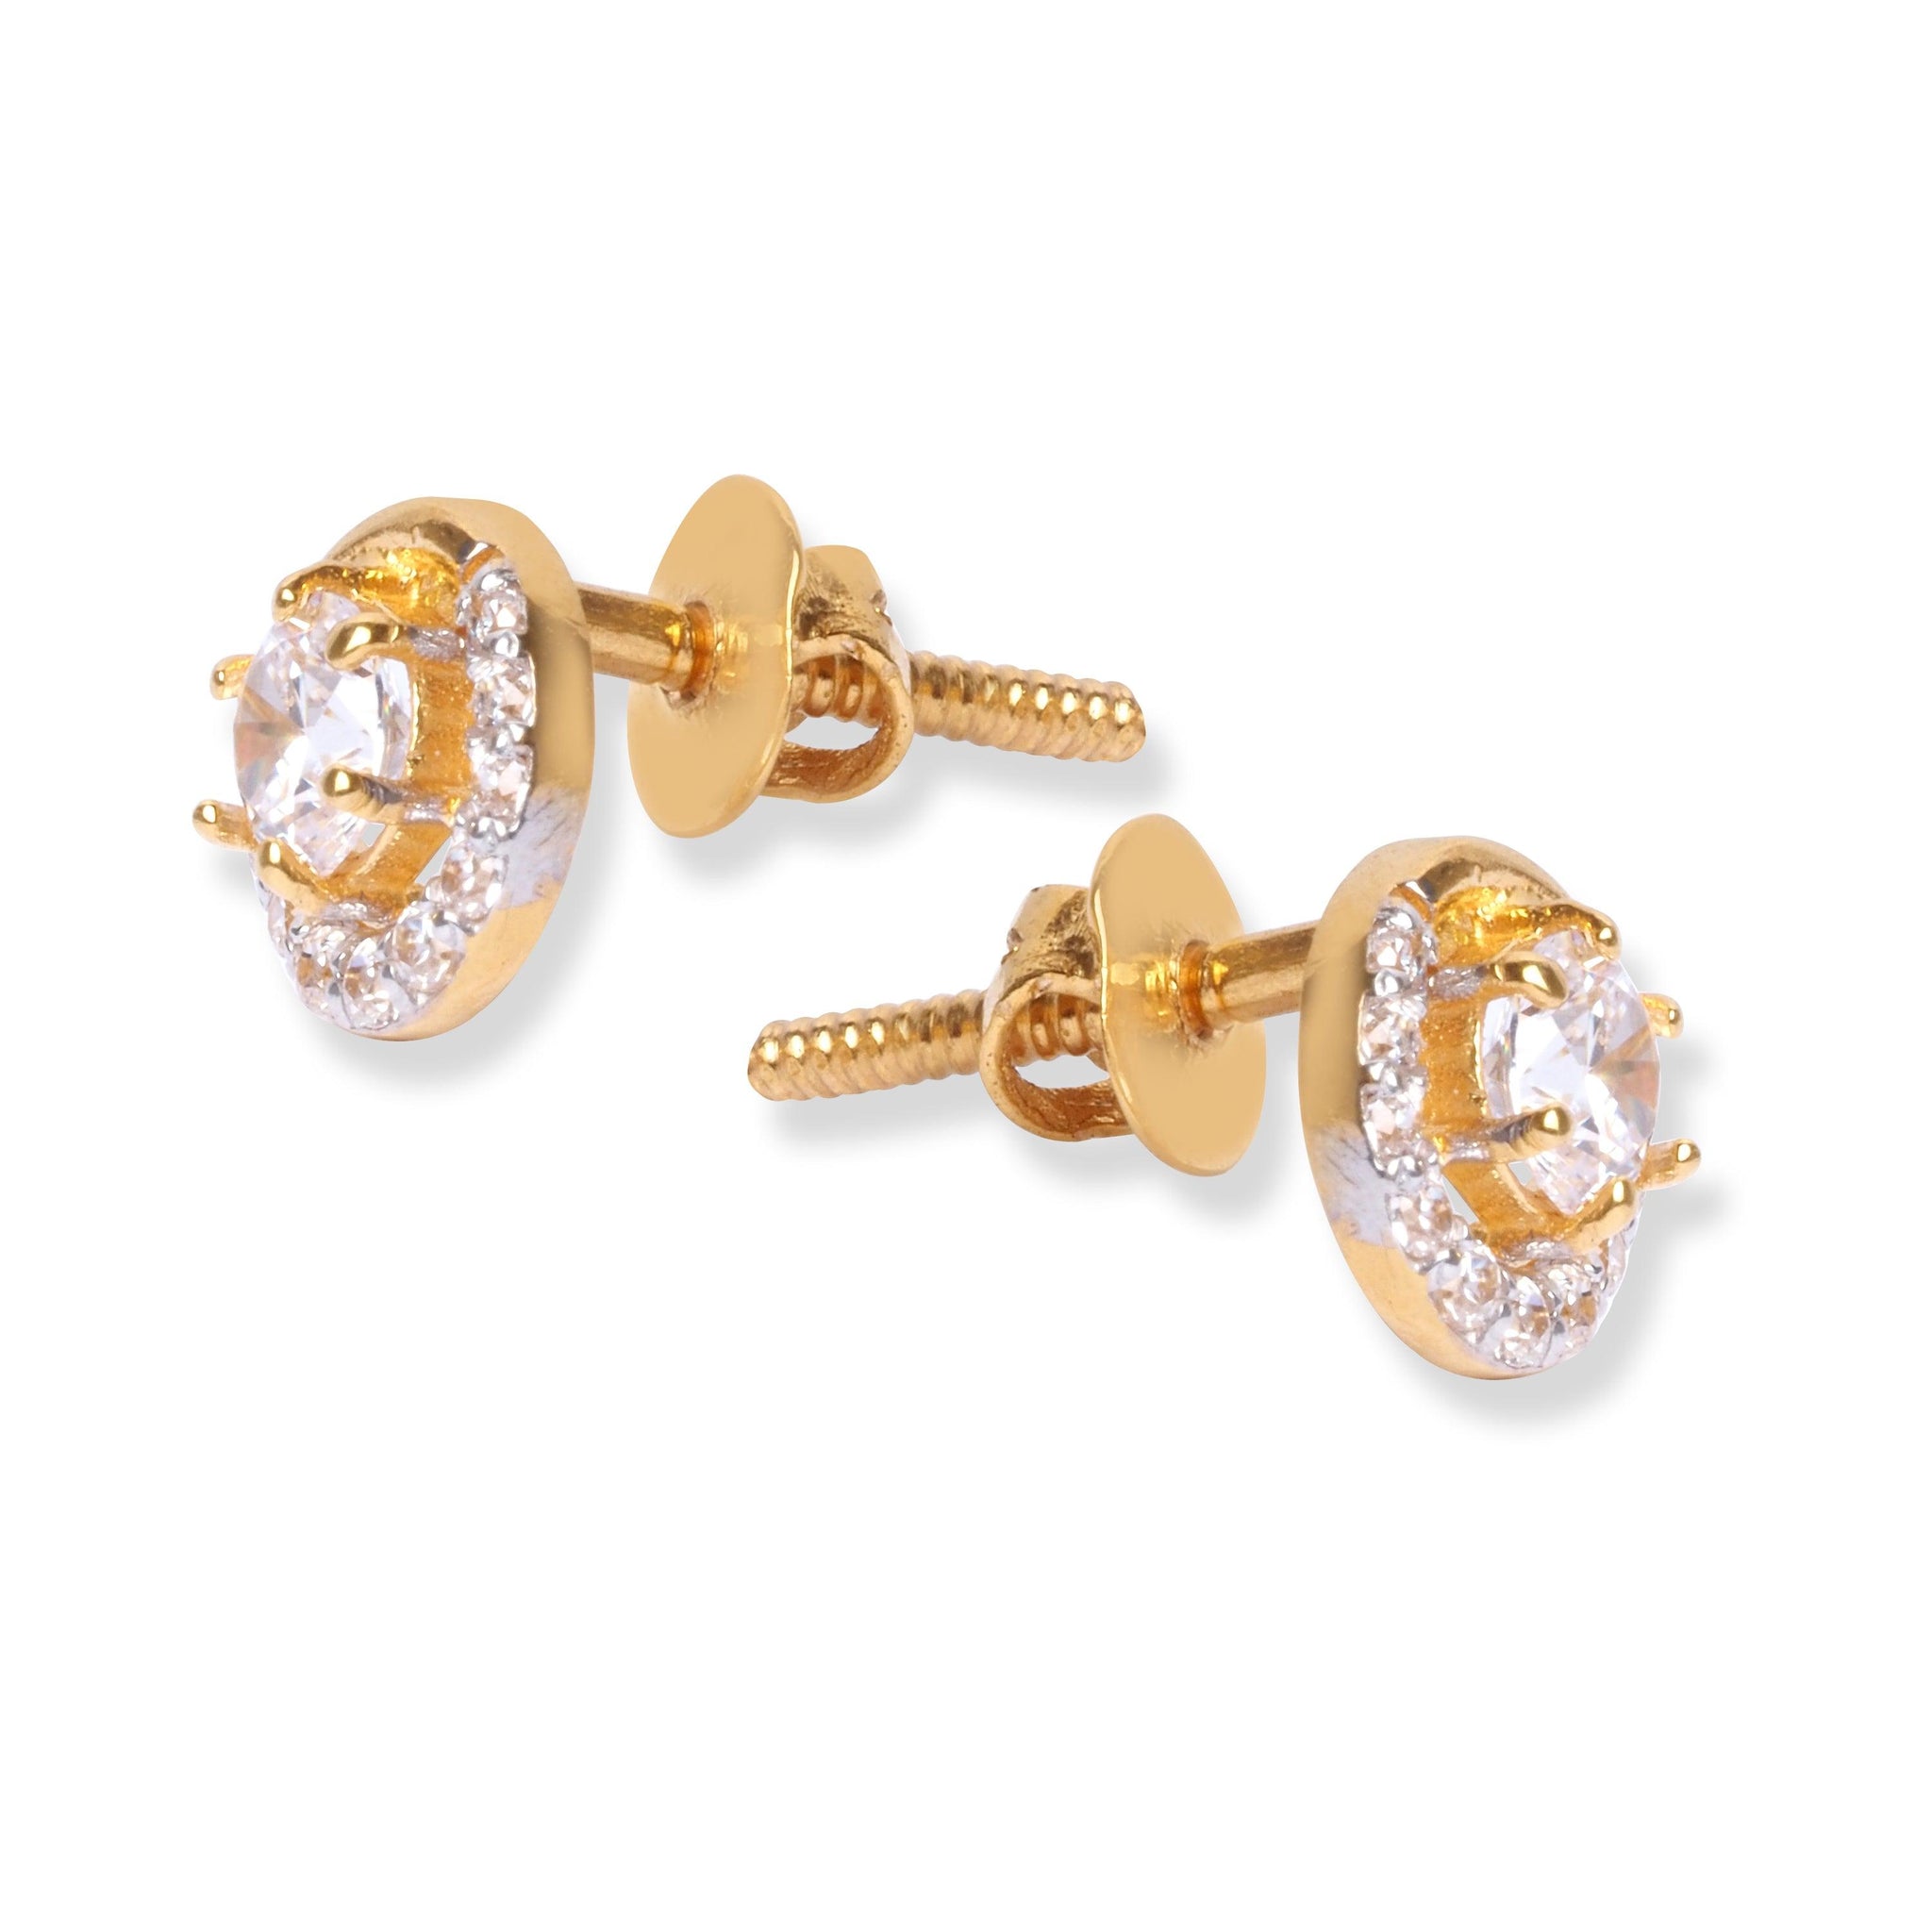 22ct Gold Stud Earrings with Cubic Zirconia Stones E-7971